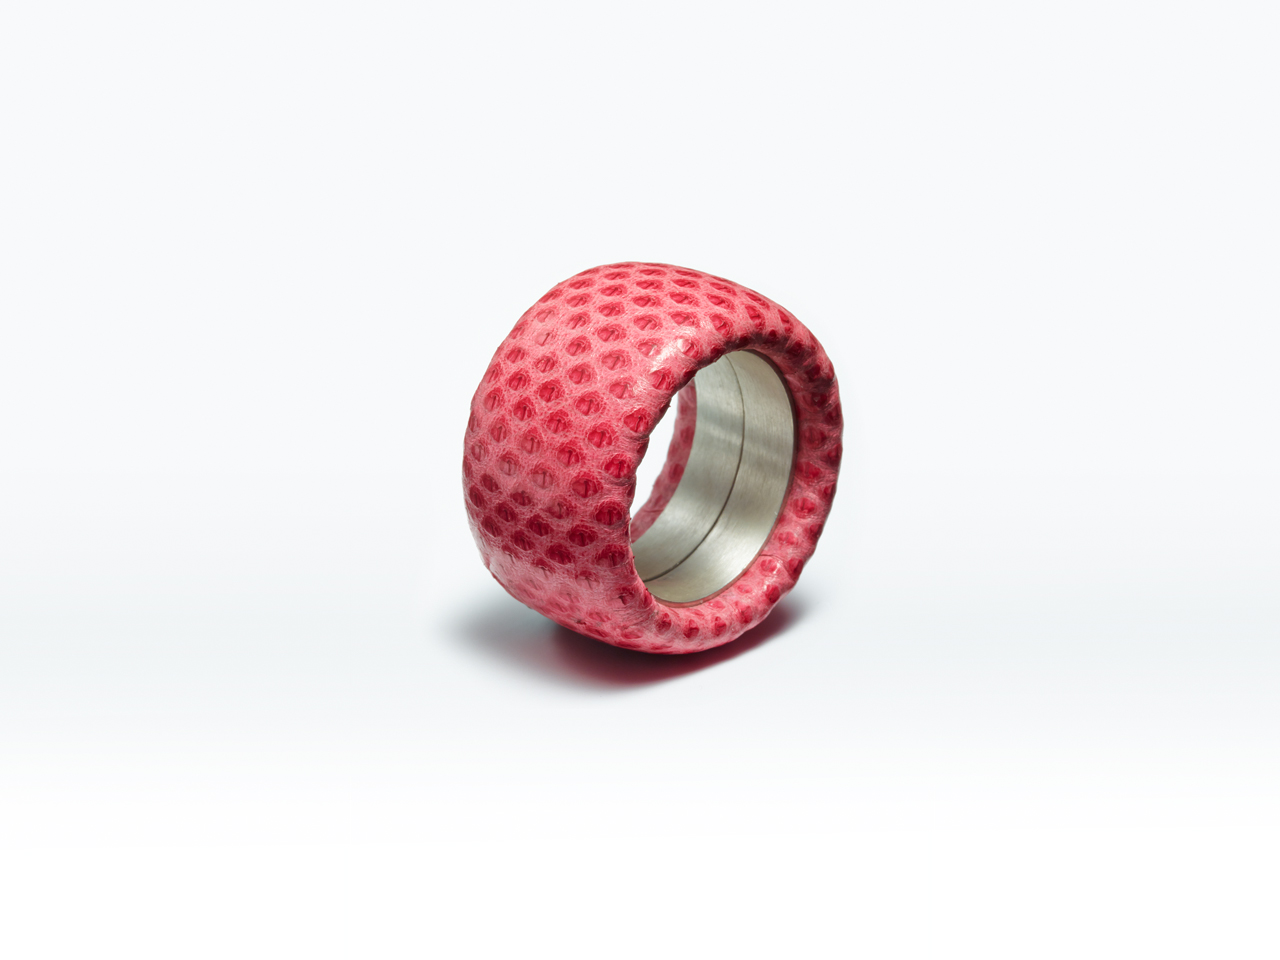 Leather Ring, MERET OPPENHEIM – LEATHER RING, pink